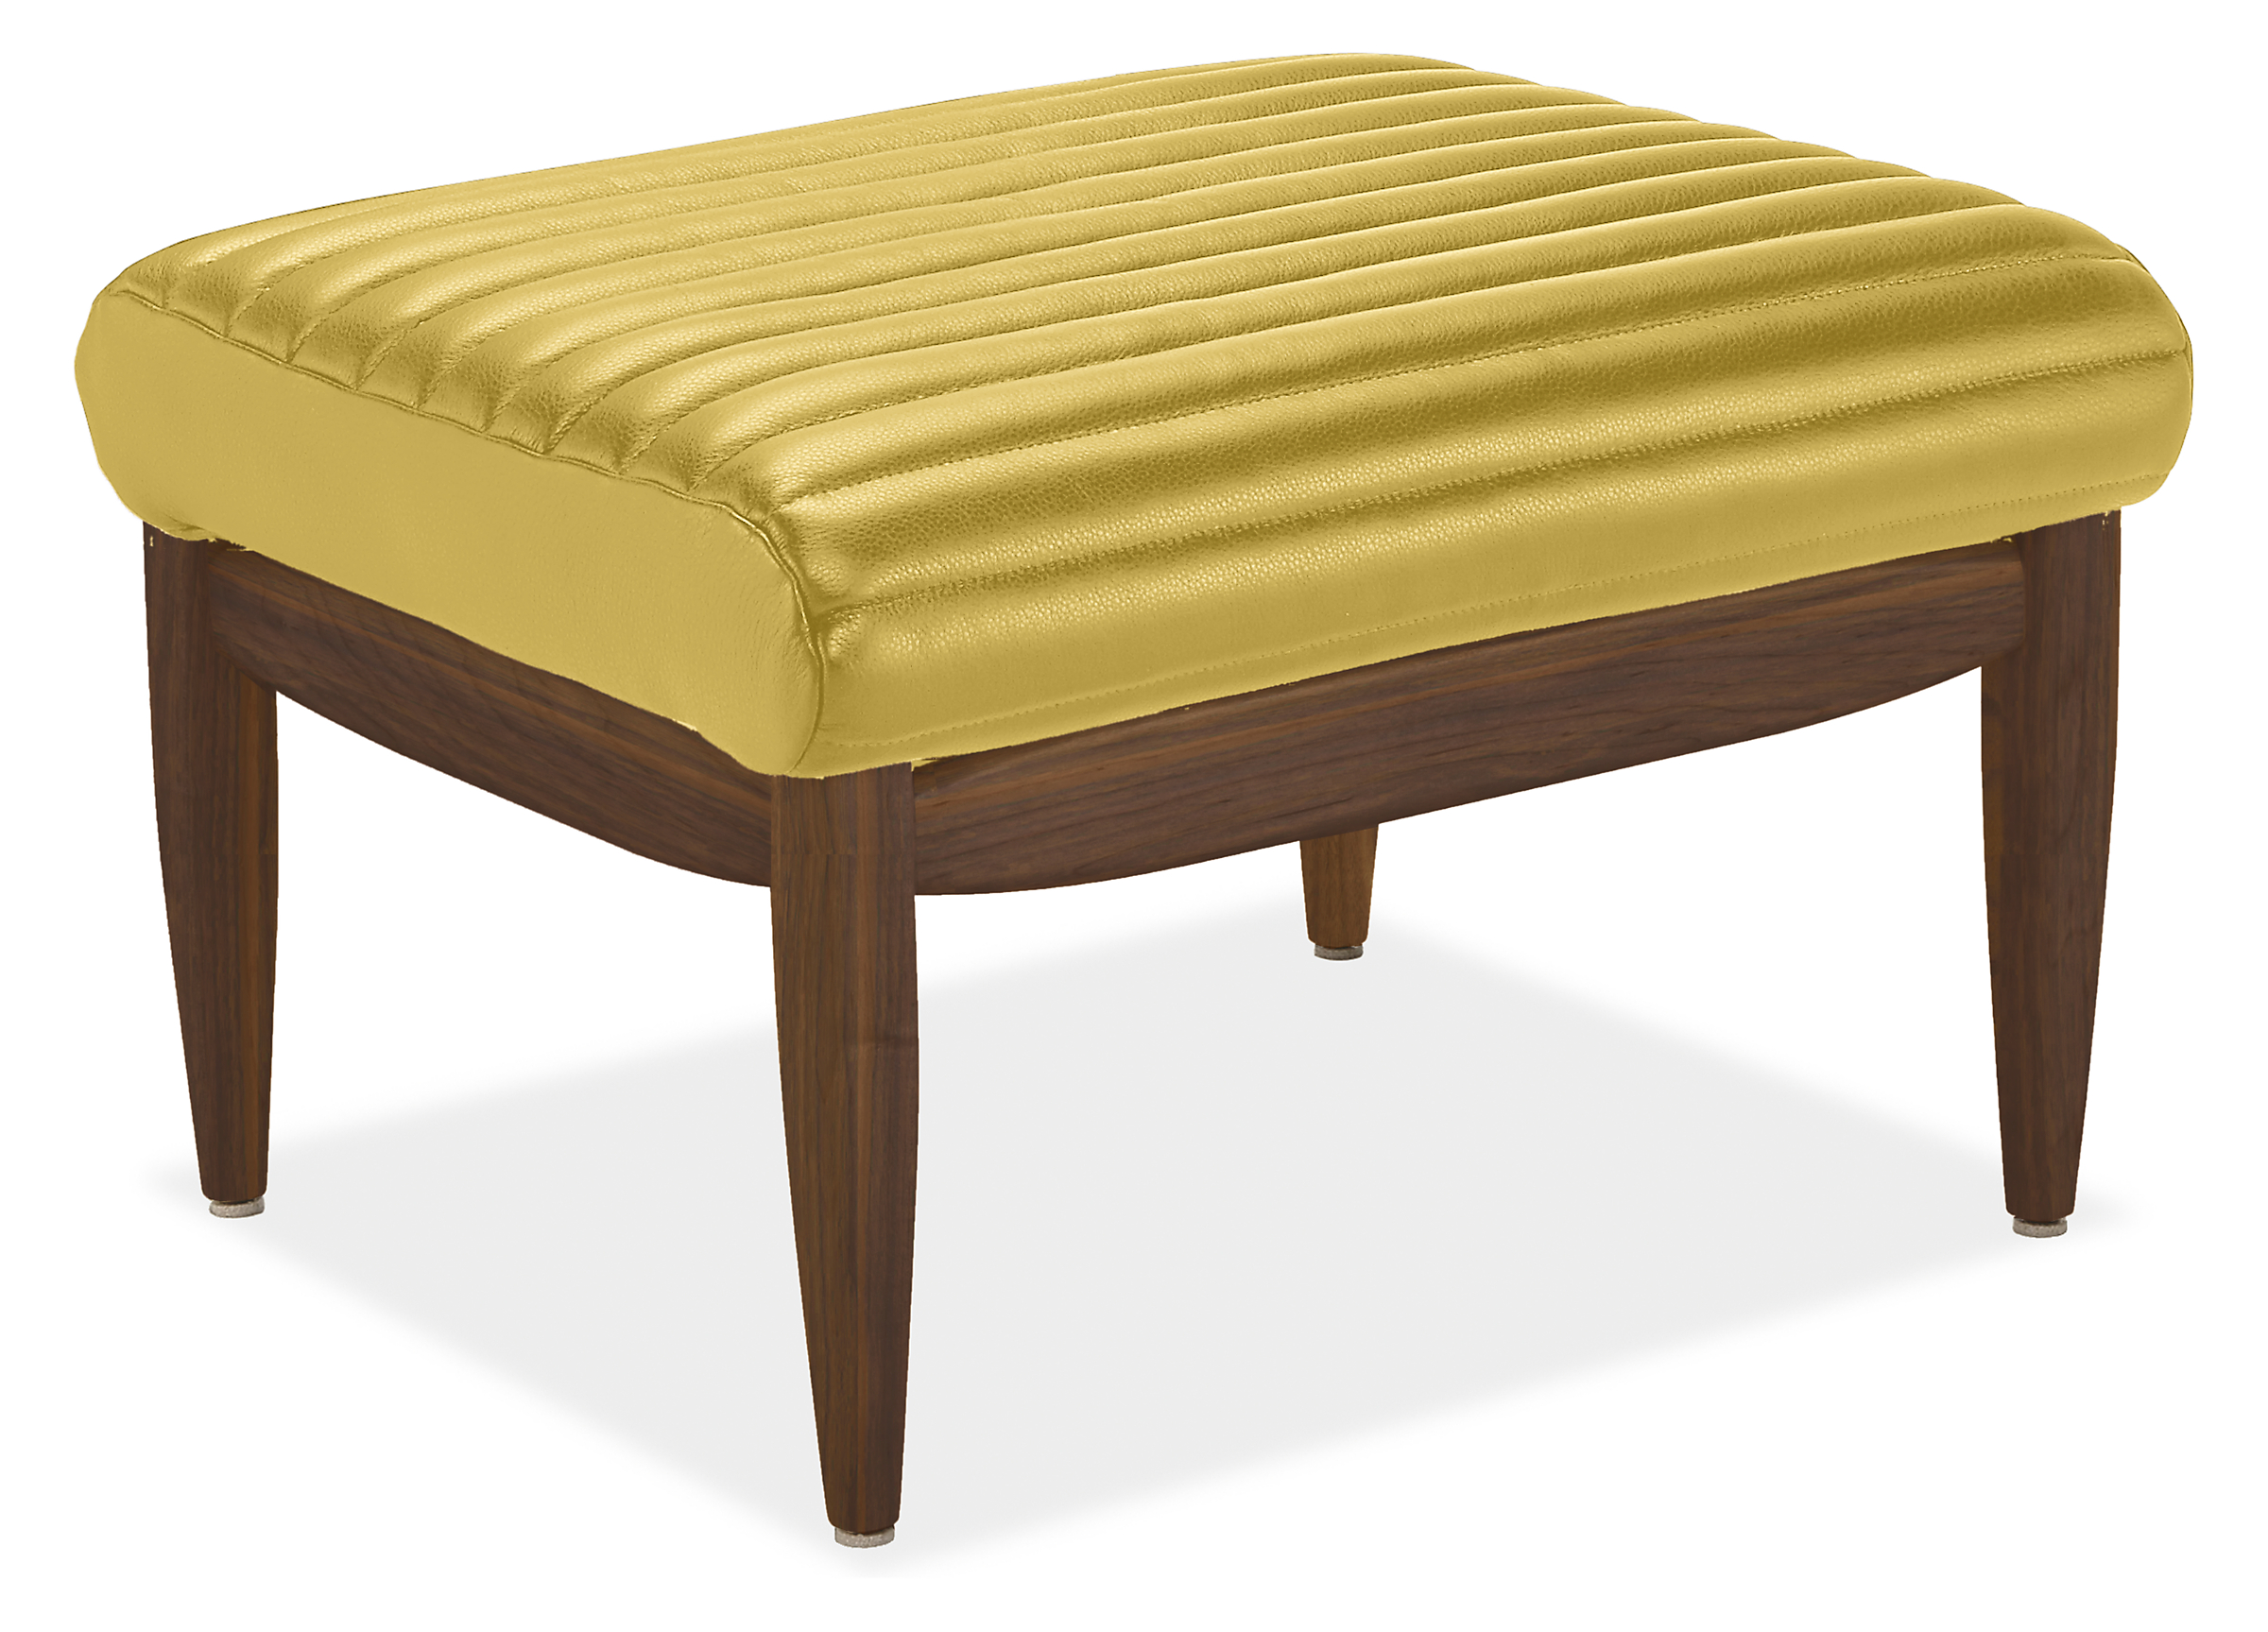 Callan 24w 20d 15h Ottoman in Vento Chartreuse Leather with Walnut Frame